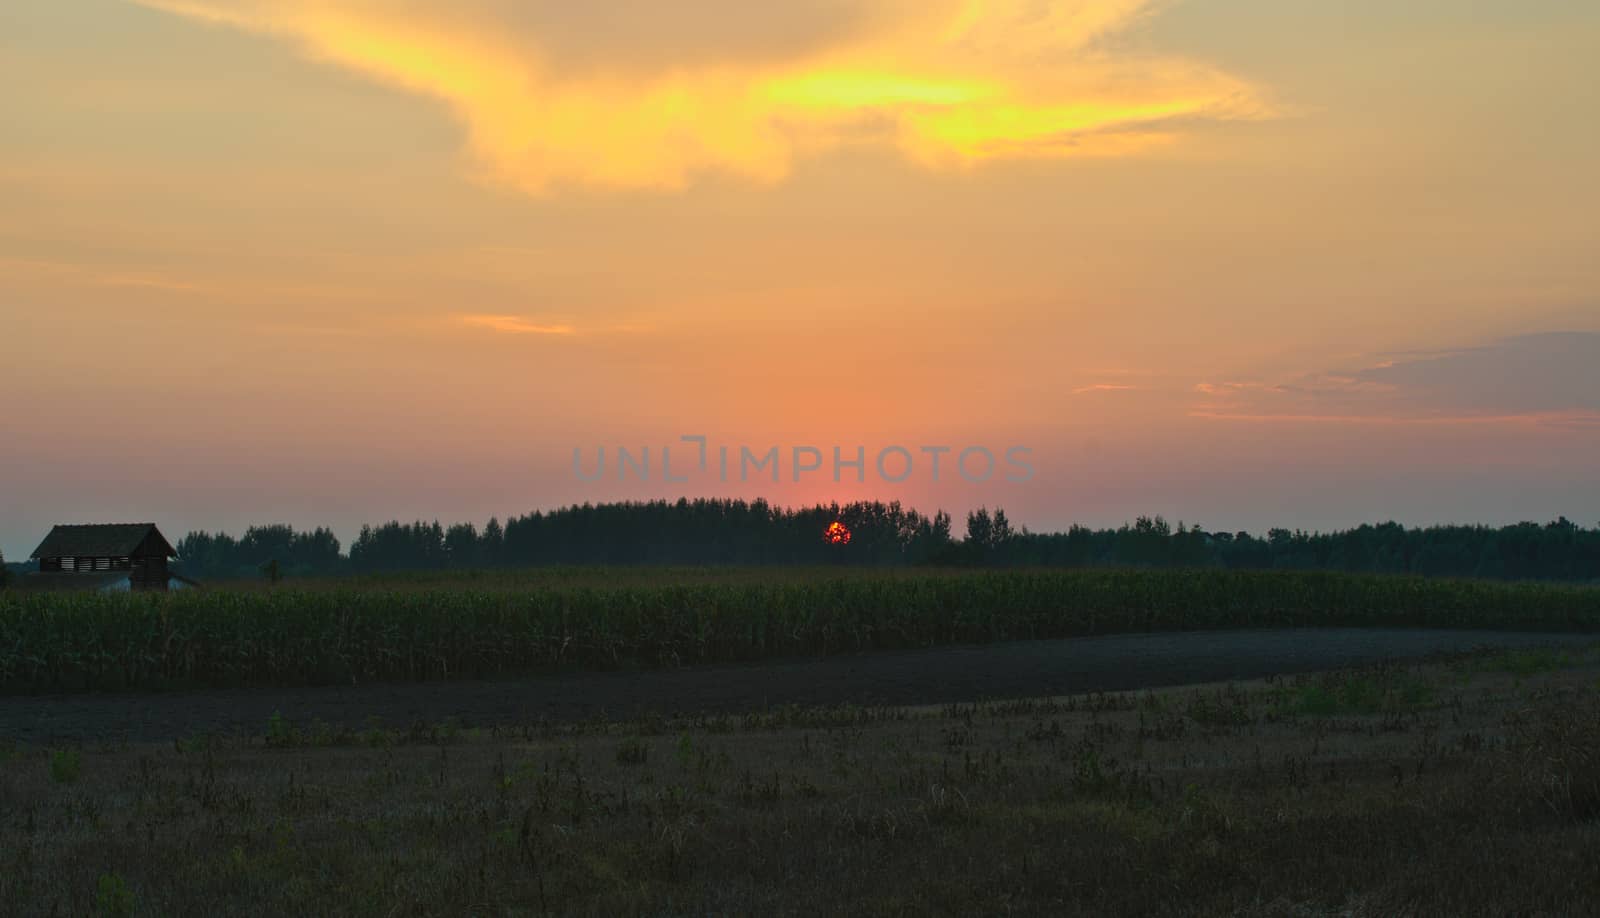 Colorful sunset over corn field, summer landscape by sheriffkule